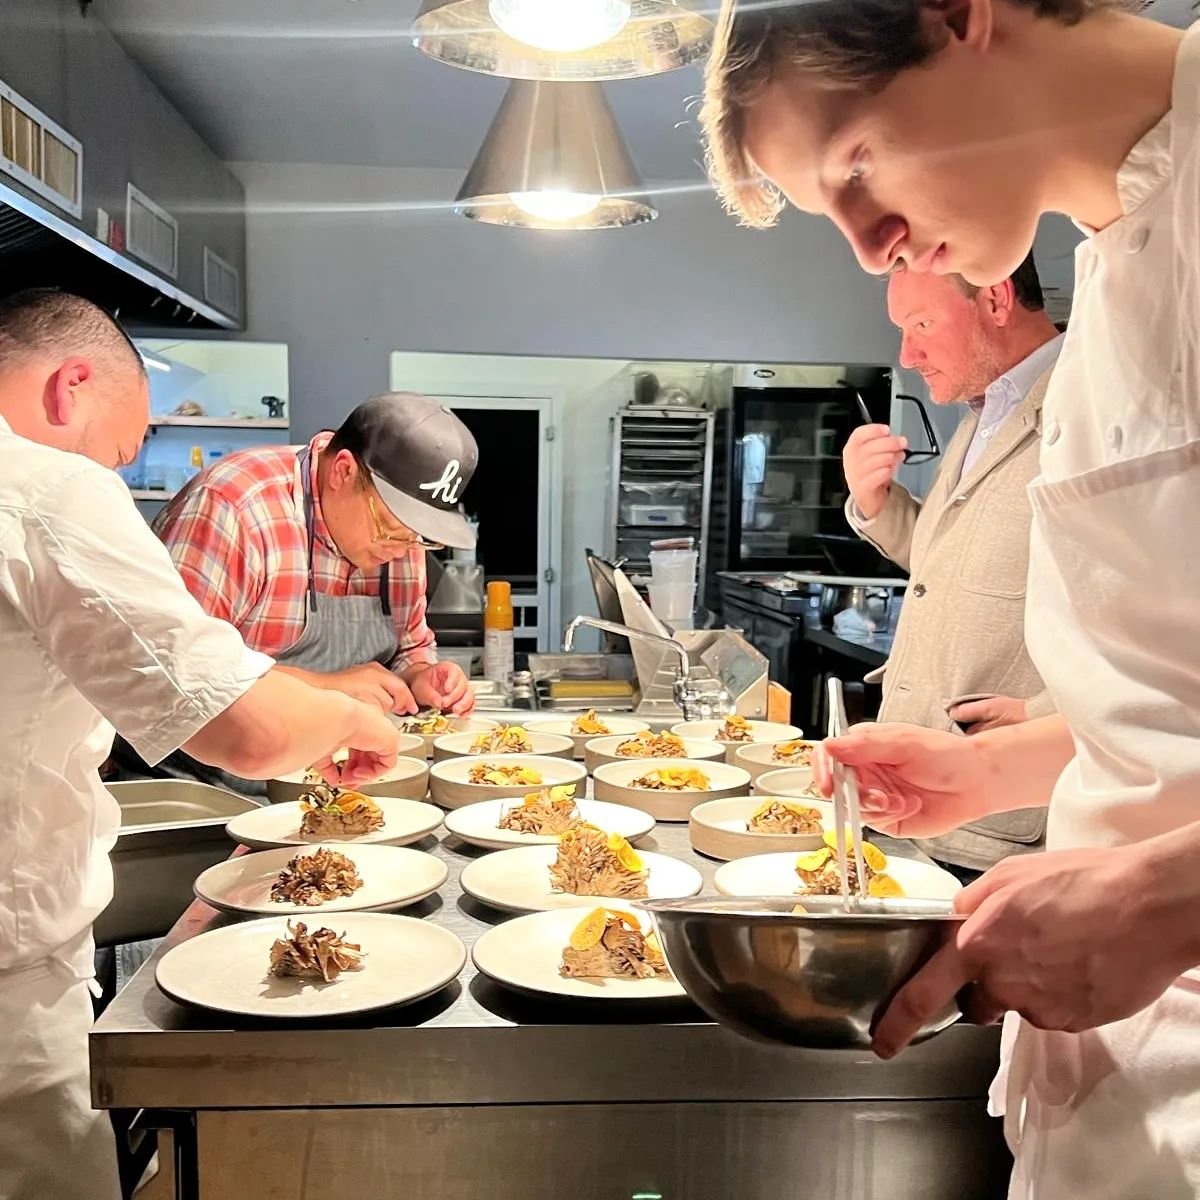 It was an unforgettable experience and a privilege to host our friend Chef Dale Talde last weekend for an exclusive one-night tasting menu event. Thank you @daletalde for joining us and sharing your culinary magic in the Catskills!